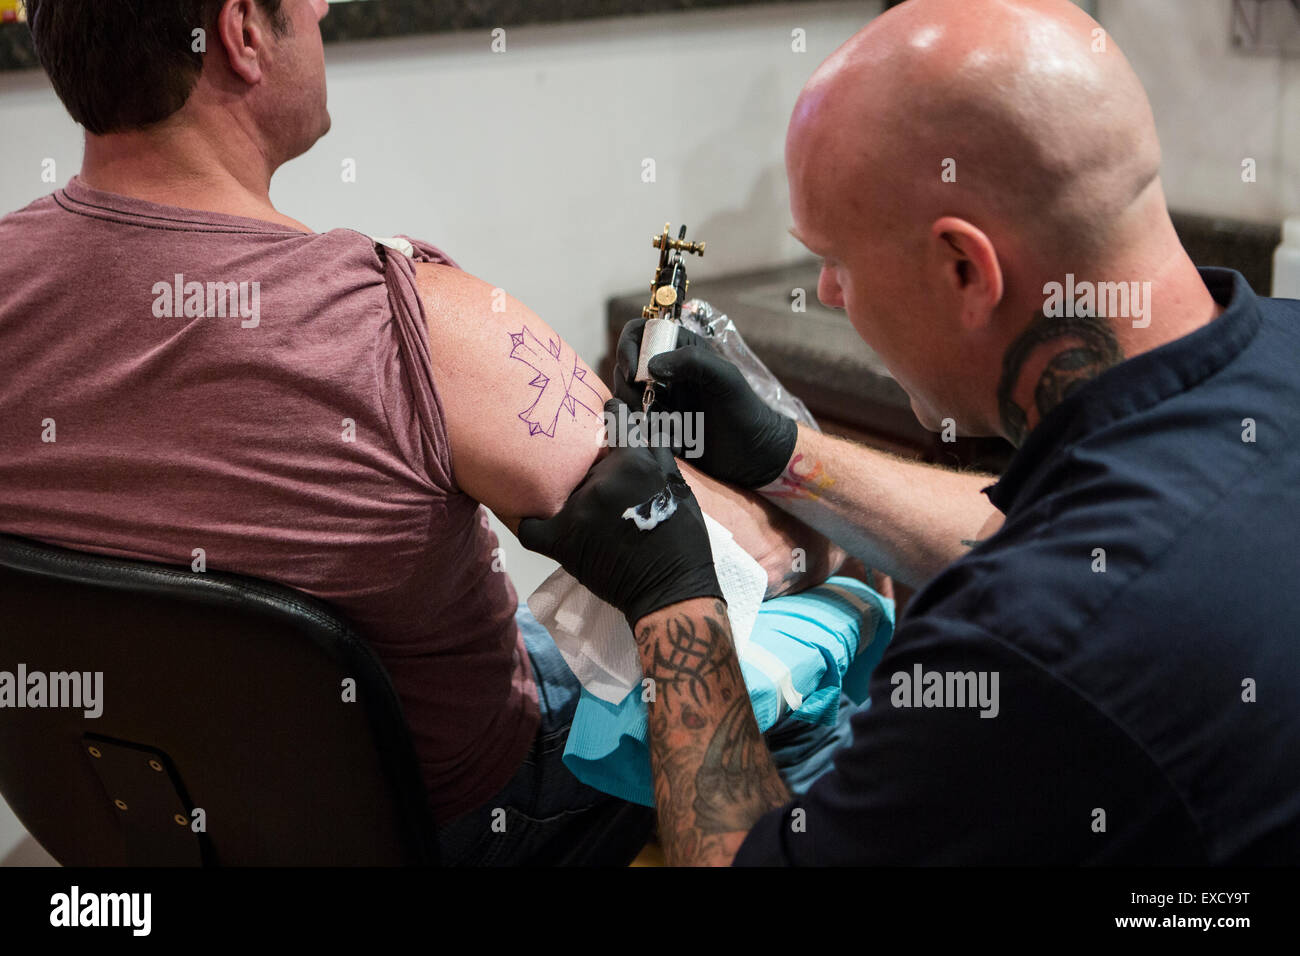 A tattoo artist giving a tattoo of a cross on a man's arm. Stock Photo